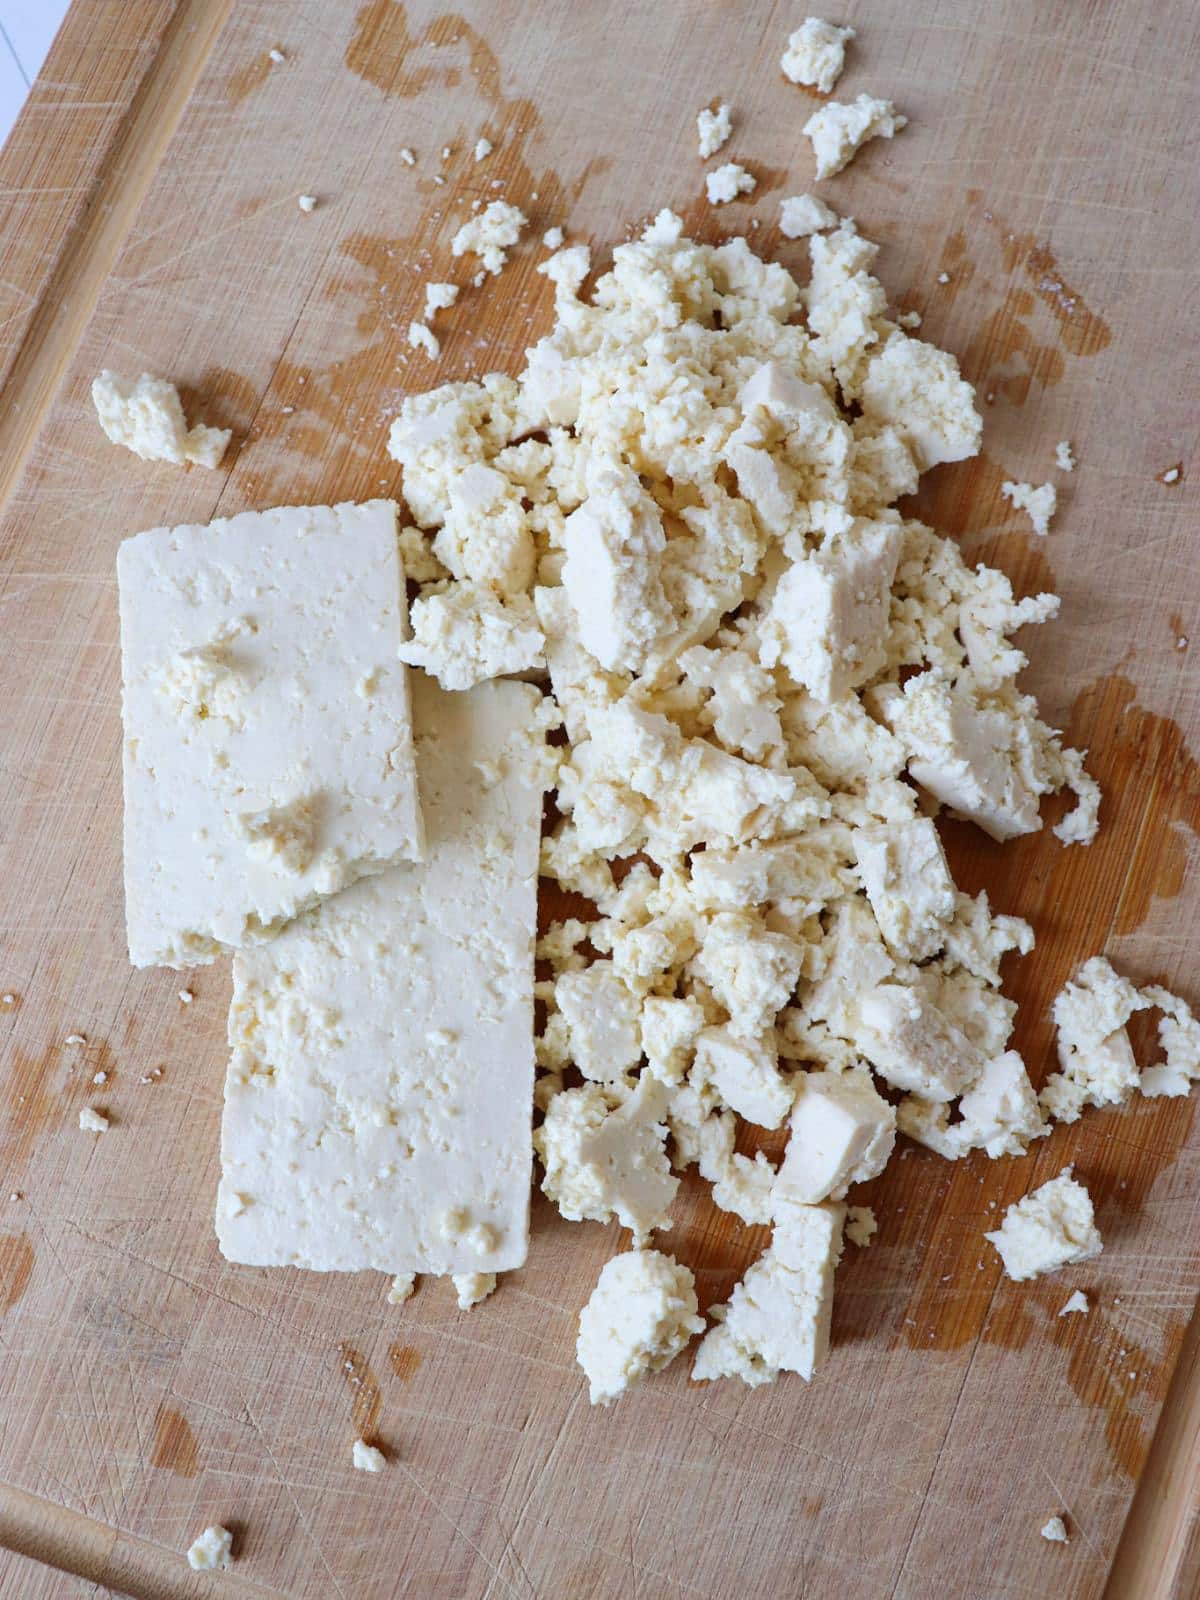 Tofu slices being crumbled on a wooden chopping board.